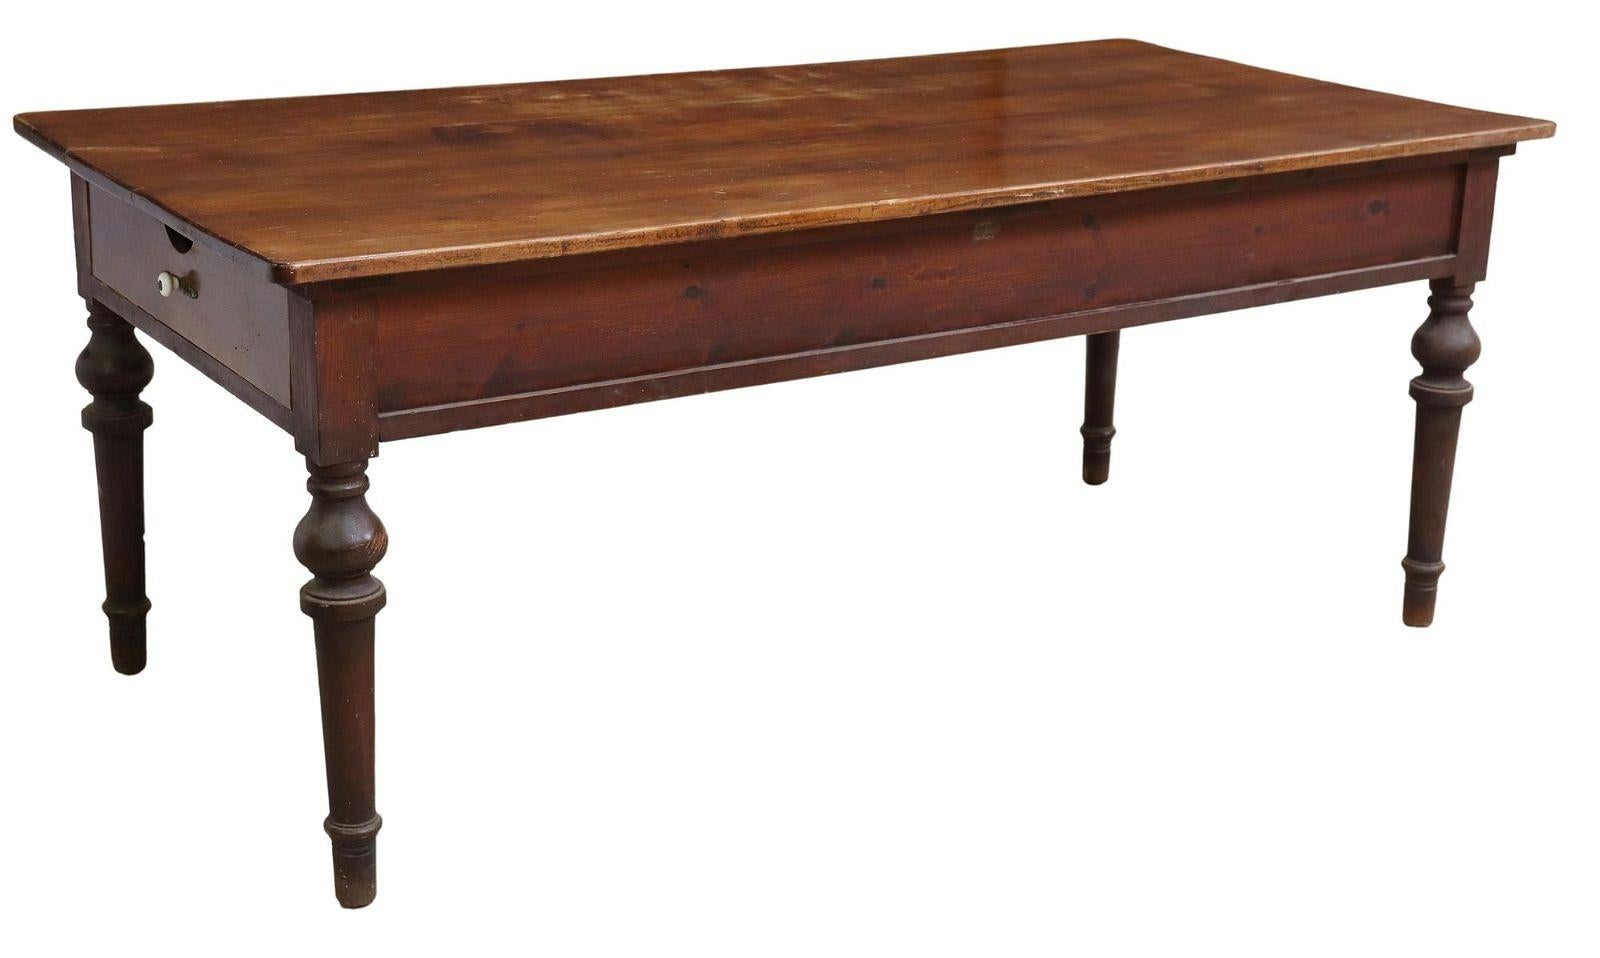 Antique Spanish Rustic Farmhouse Work Dining Table, 19th C In Good Condition For Sale In Sheridan, CO